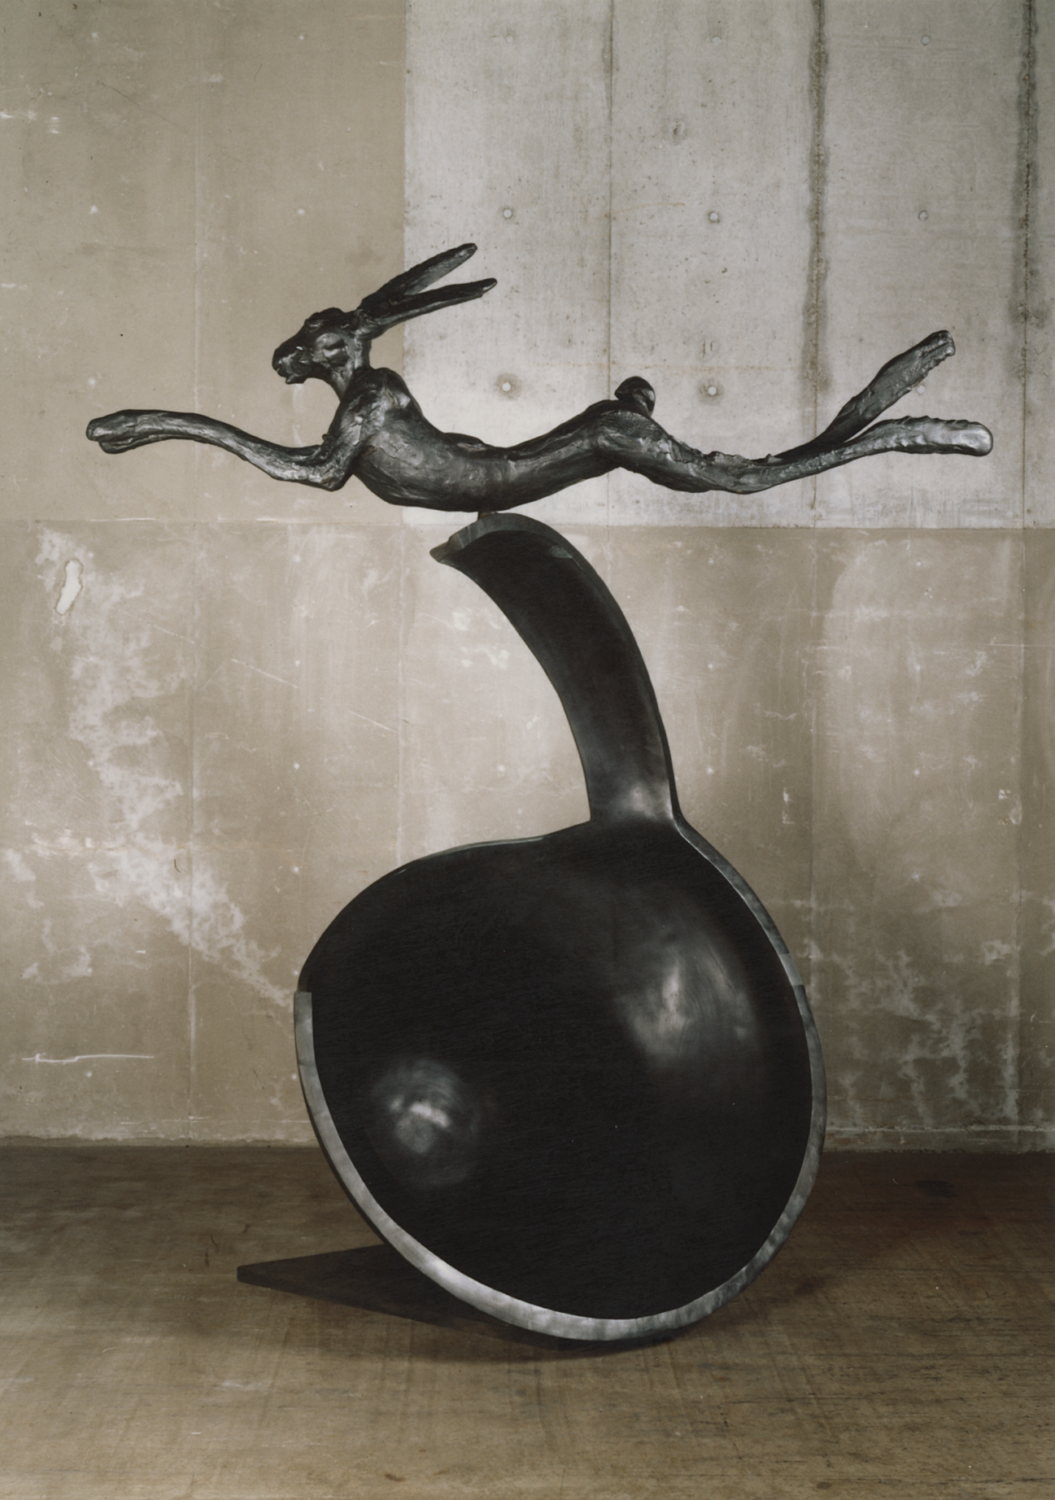 Leaping Hare on Curly Bell